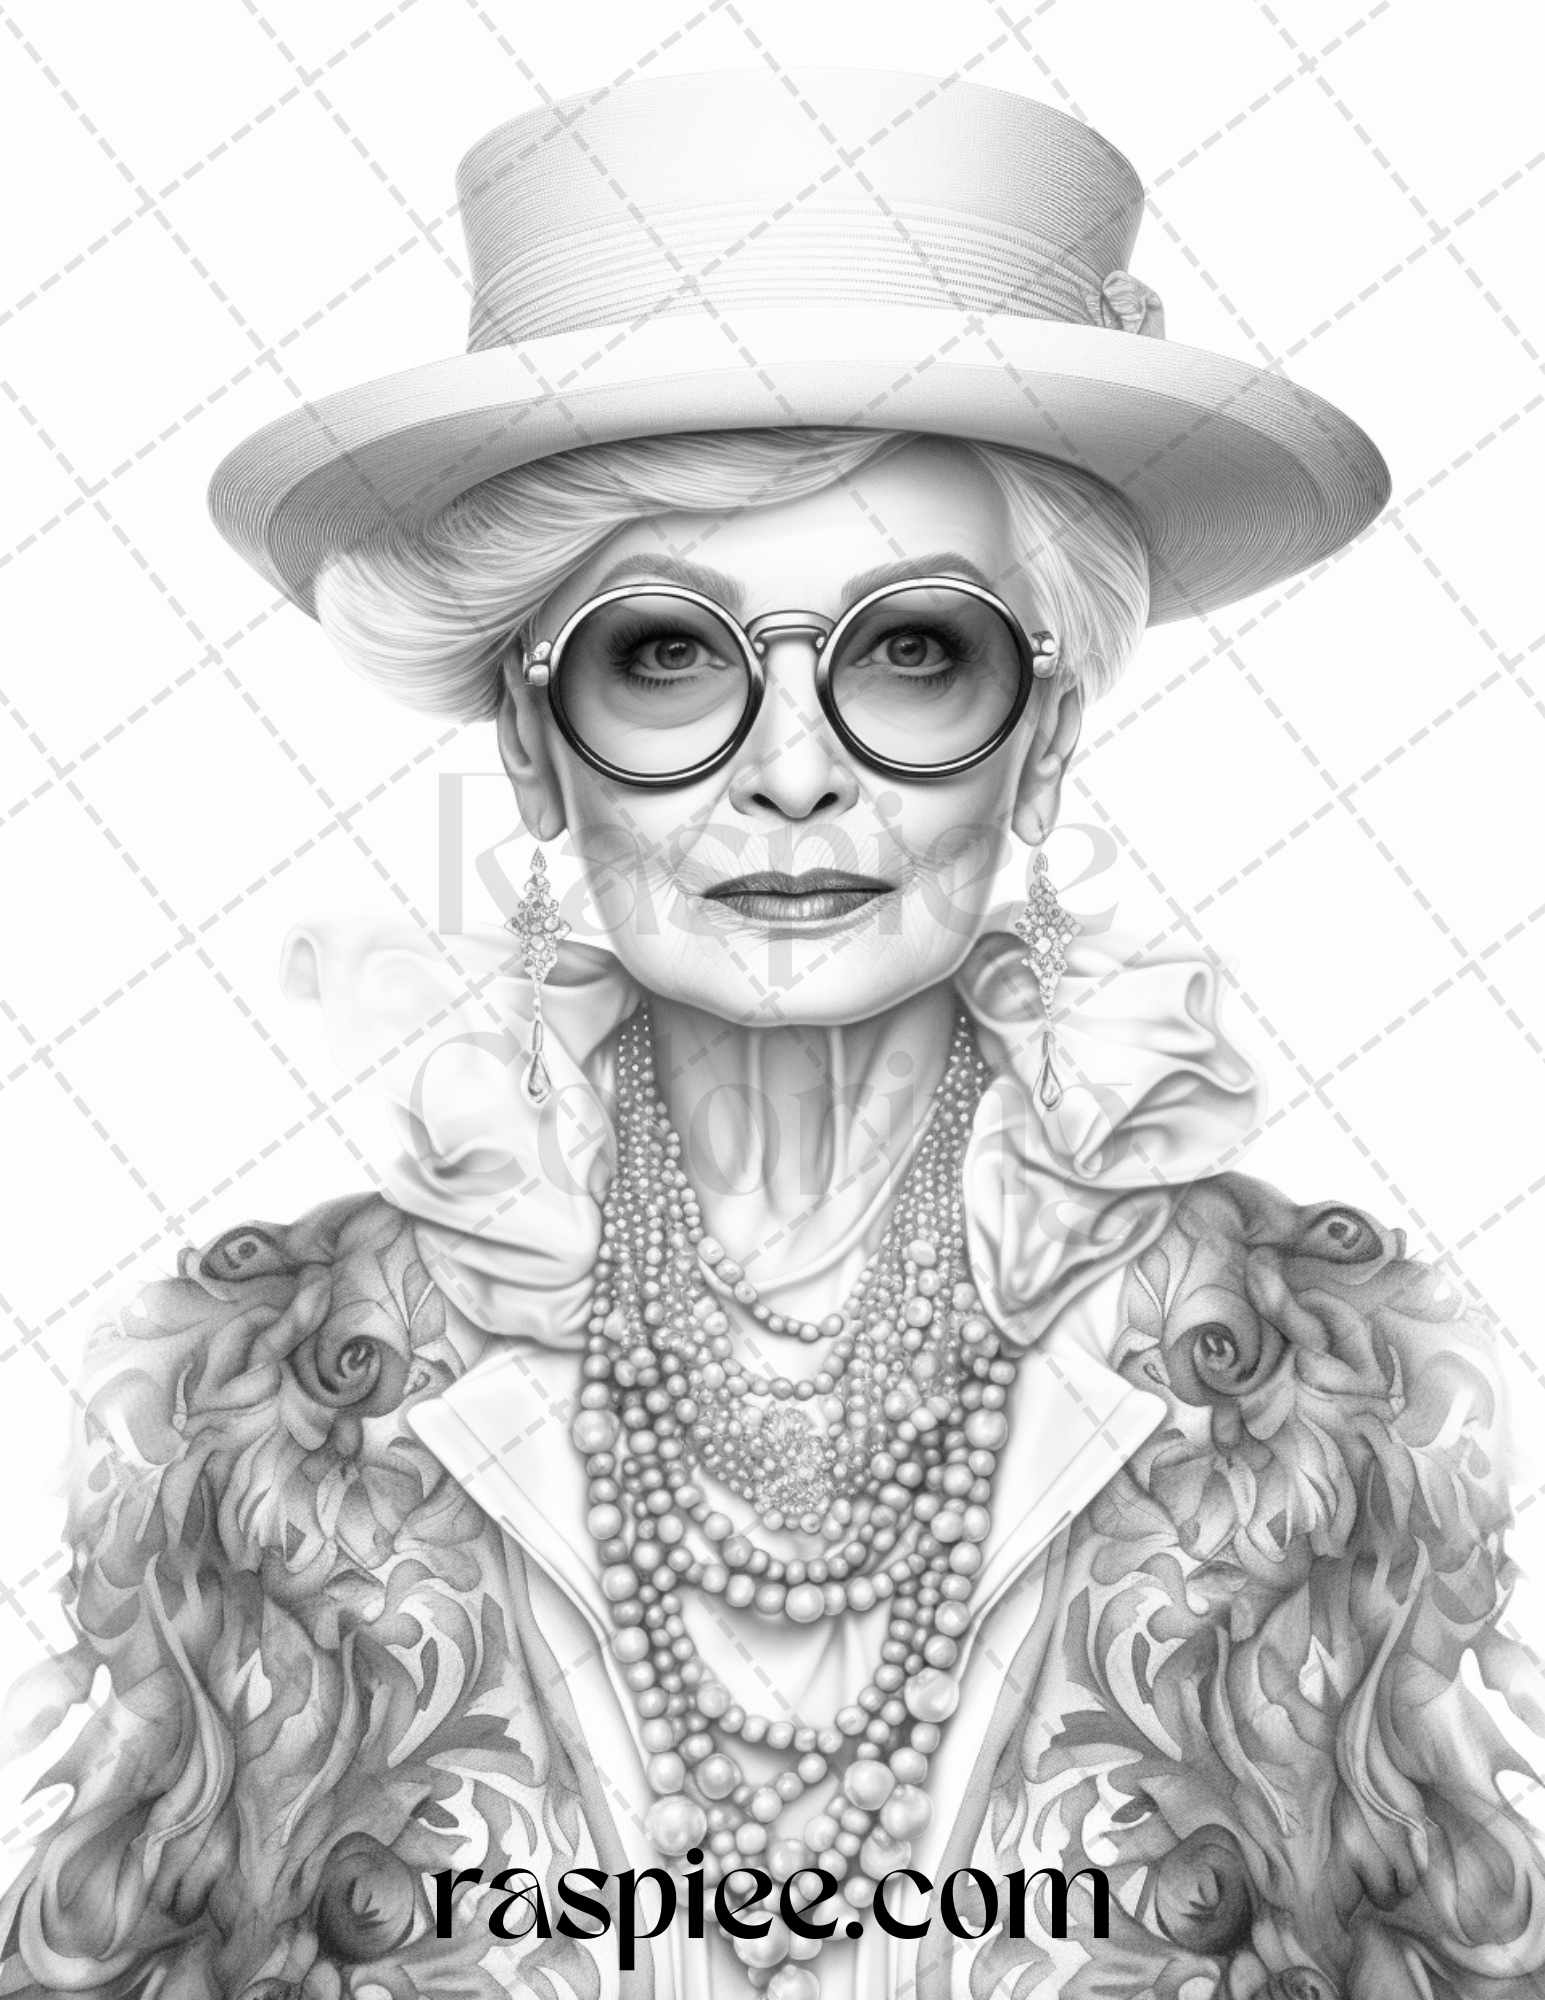 Fashionista Grandma Coloring Pages, Grayscale Coloring Sheets, Printable Adult Coloring Pages, Stylish Grandmother Gifts, Unique Gifts for Seniors, Printable Crafts for Adults, Trendy Coloring Activities, Creative Hobby for Grandmas, Elegant Coloring Books, High-Quality Coloring Printables, Fashionable Adult Coloring, Portrait Coloring Pages